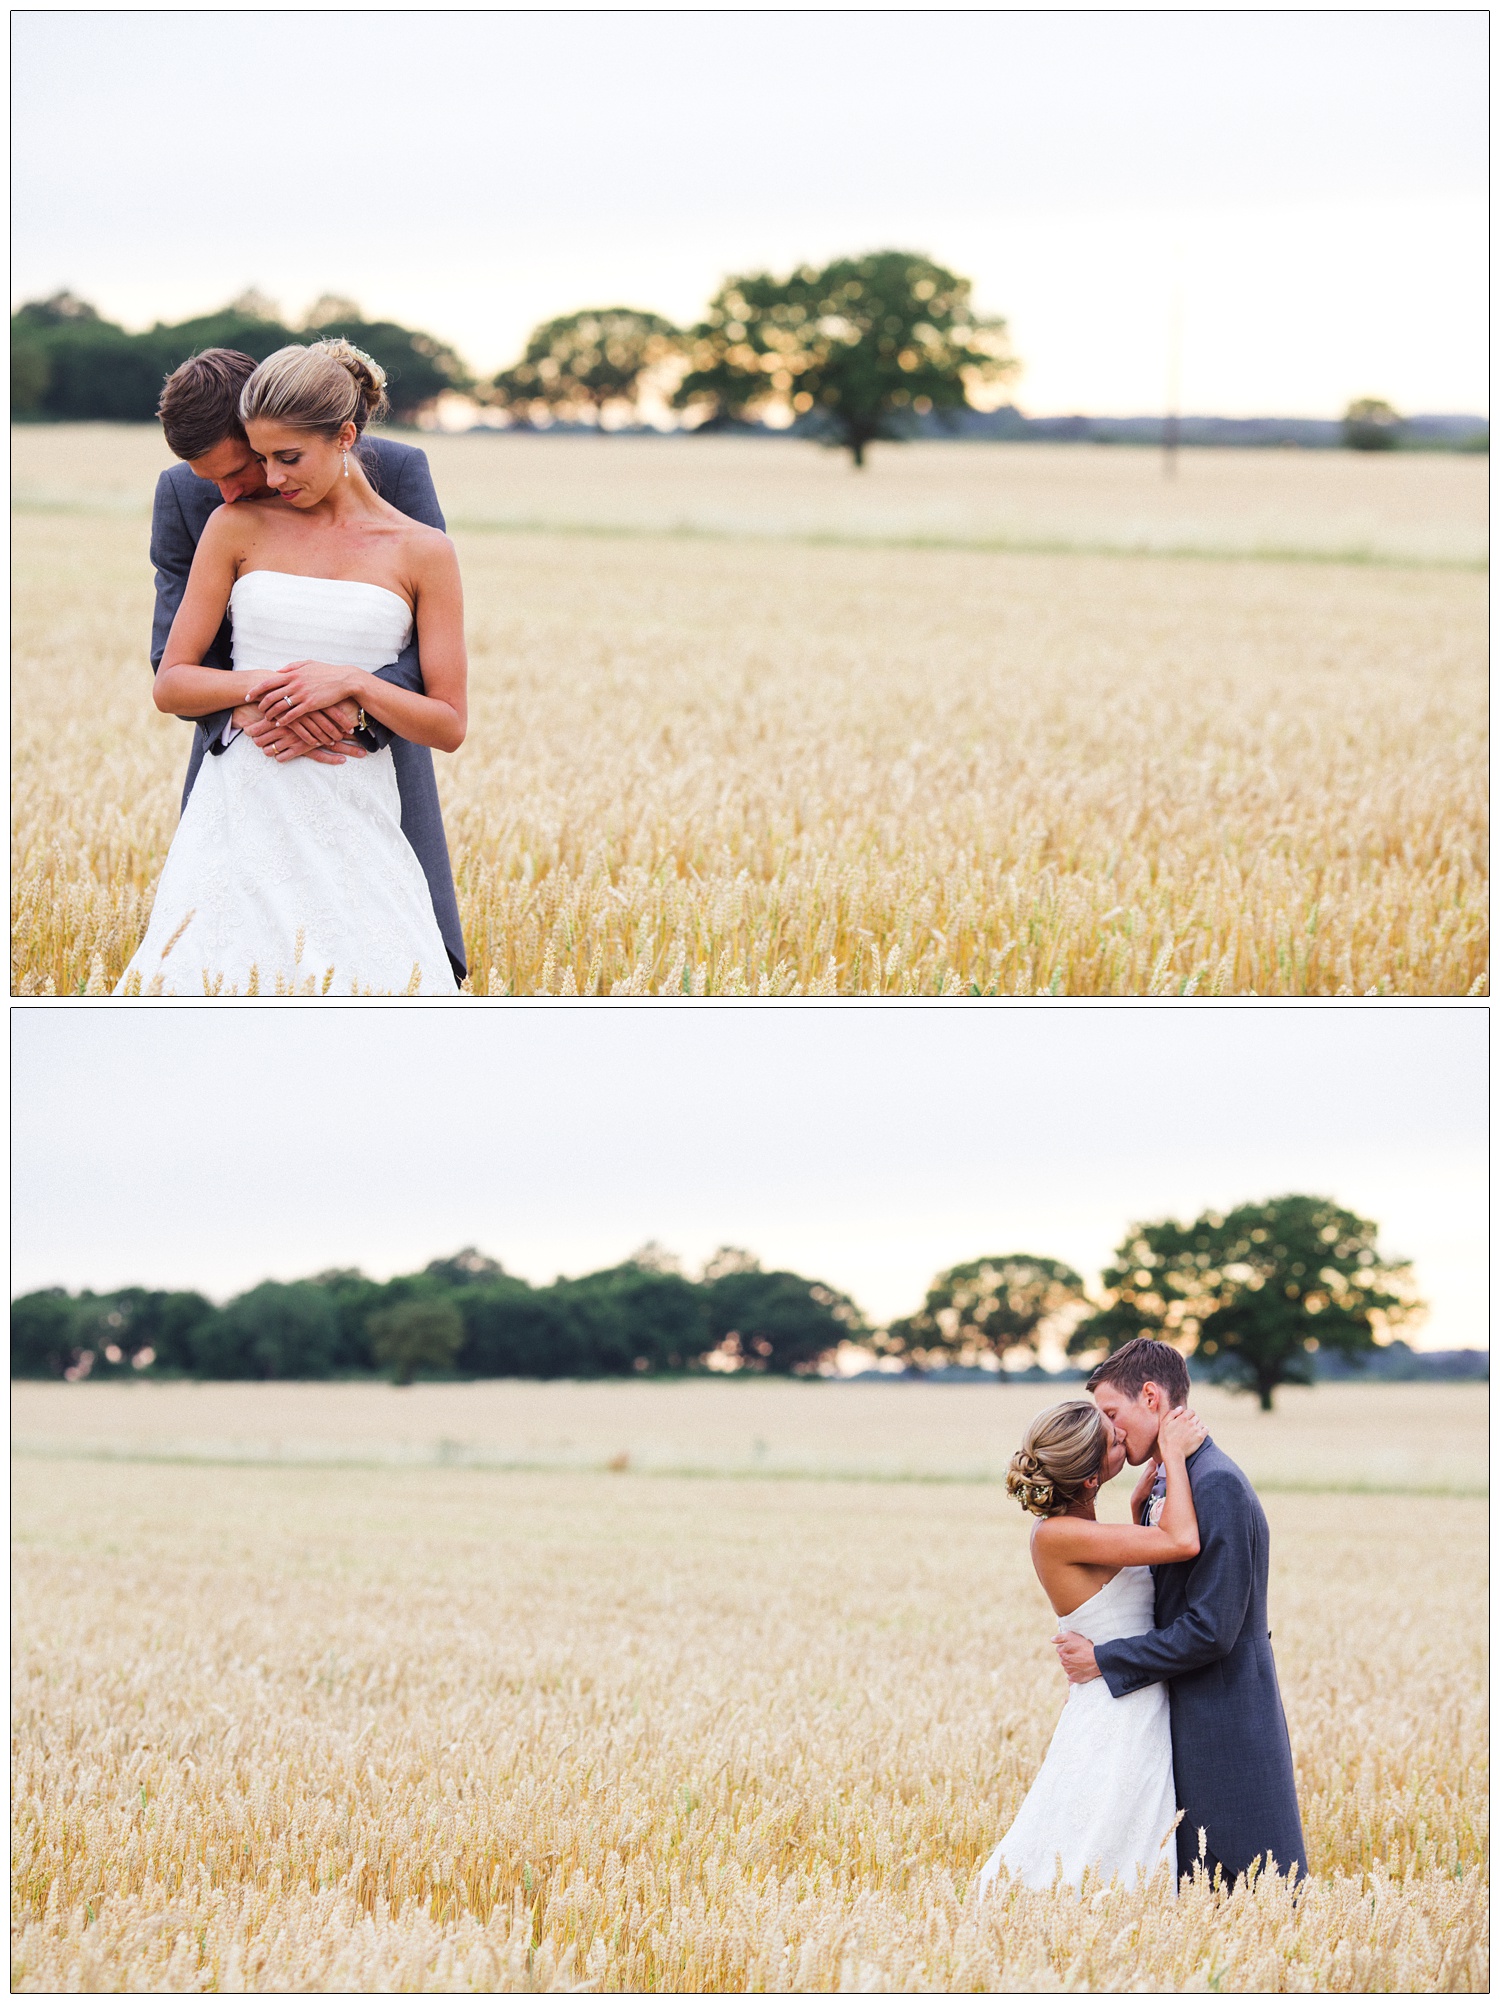 Bride and groom hugging and kissing in a field.